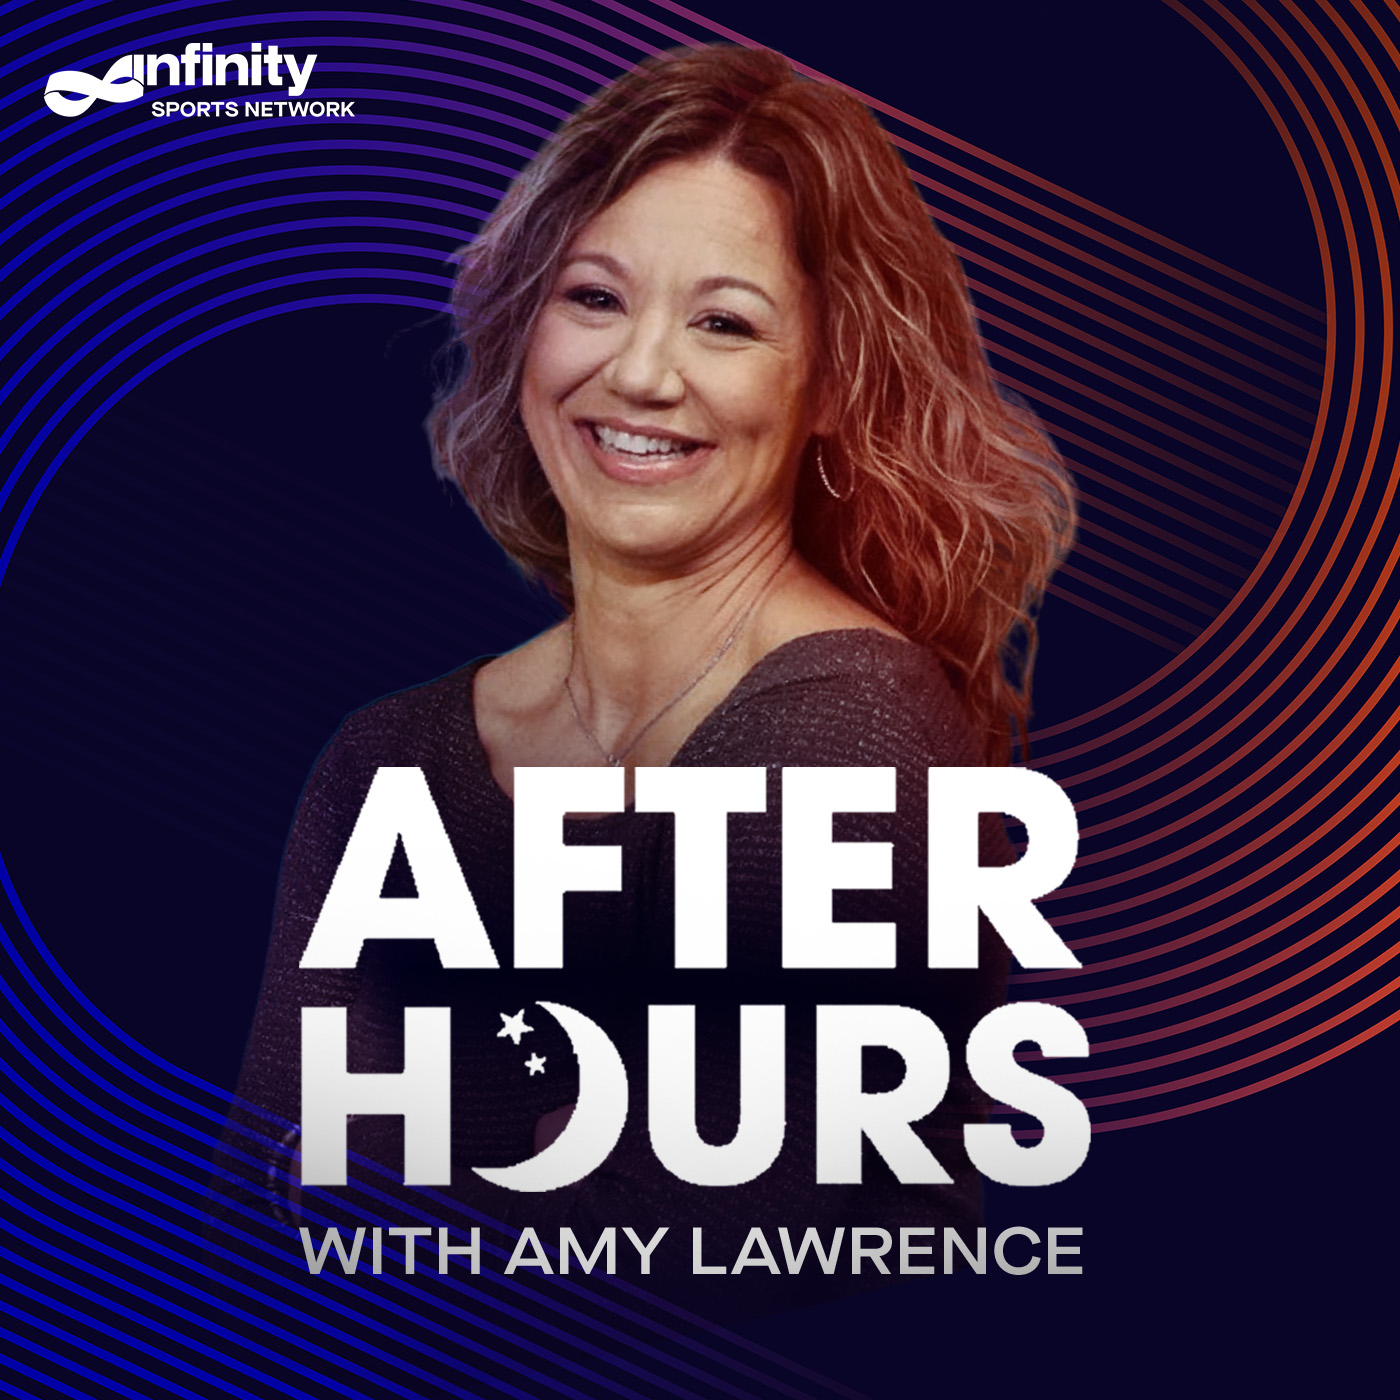 7/15/21 After Hours with Amy Lawrence PODCAST: Hour 3